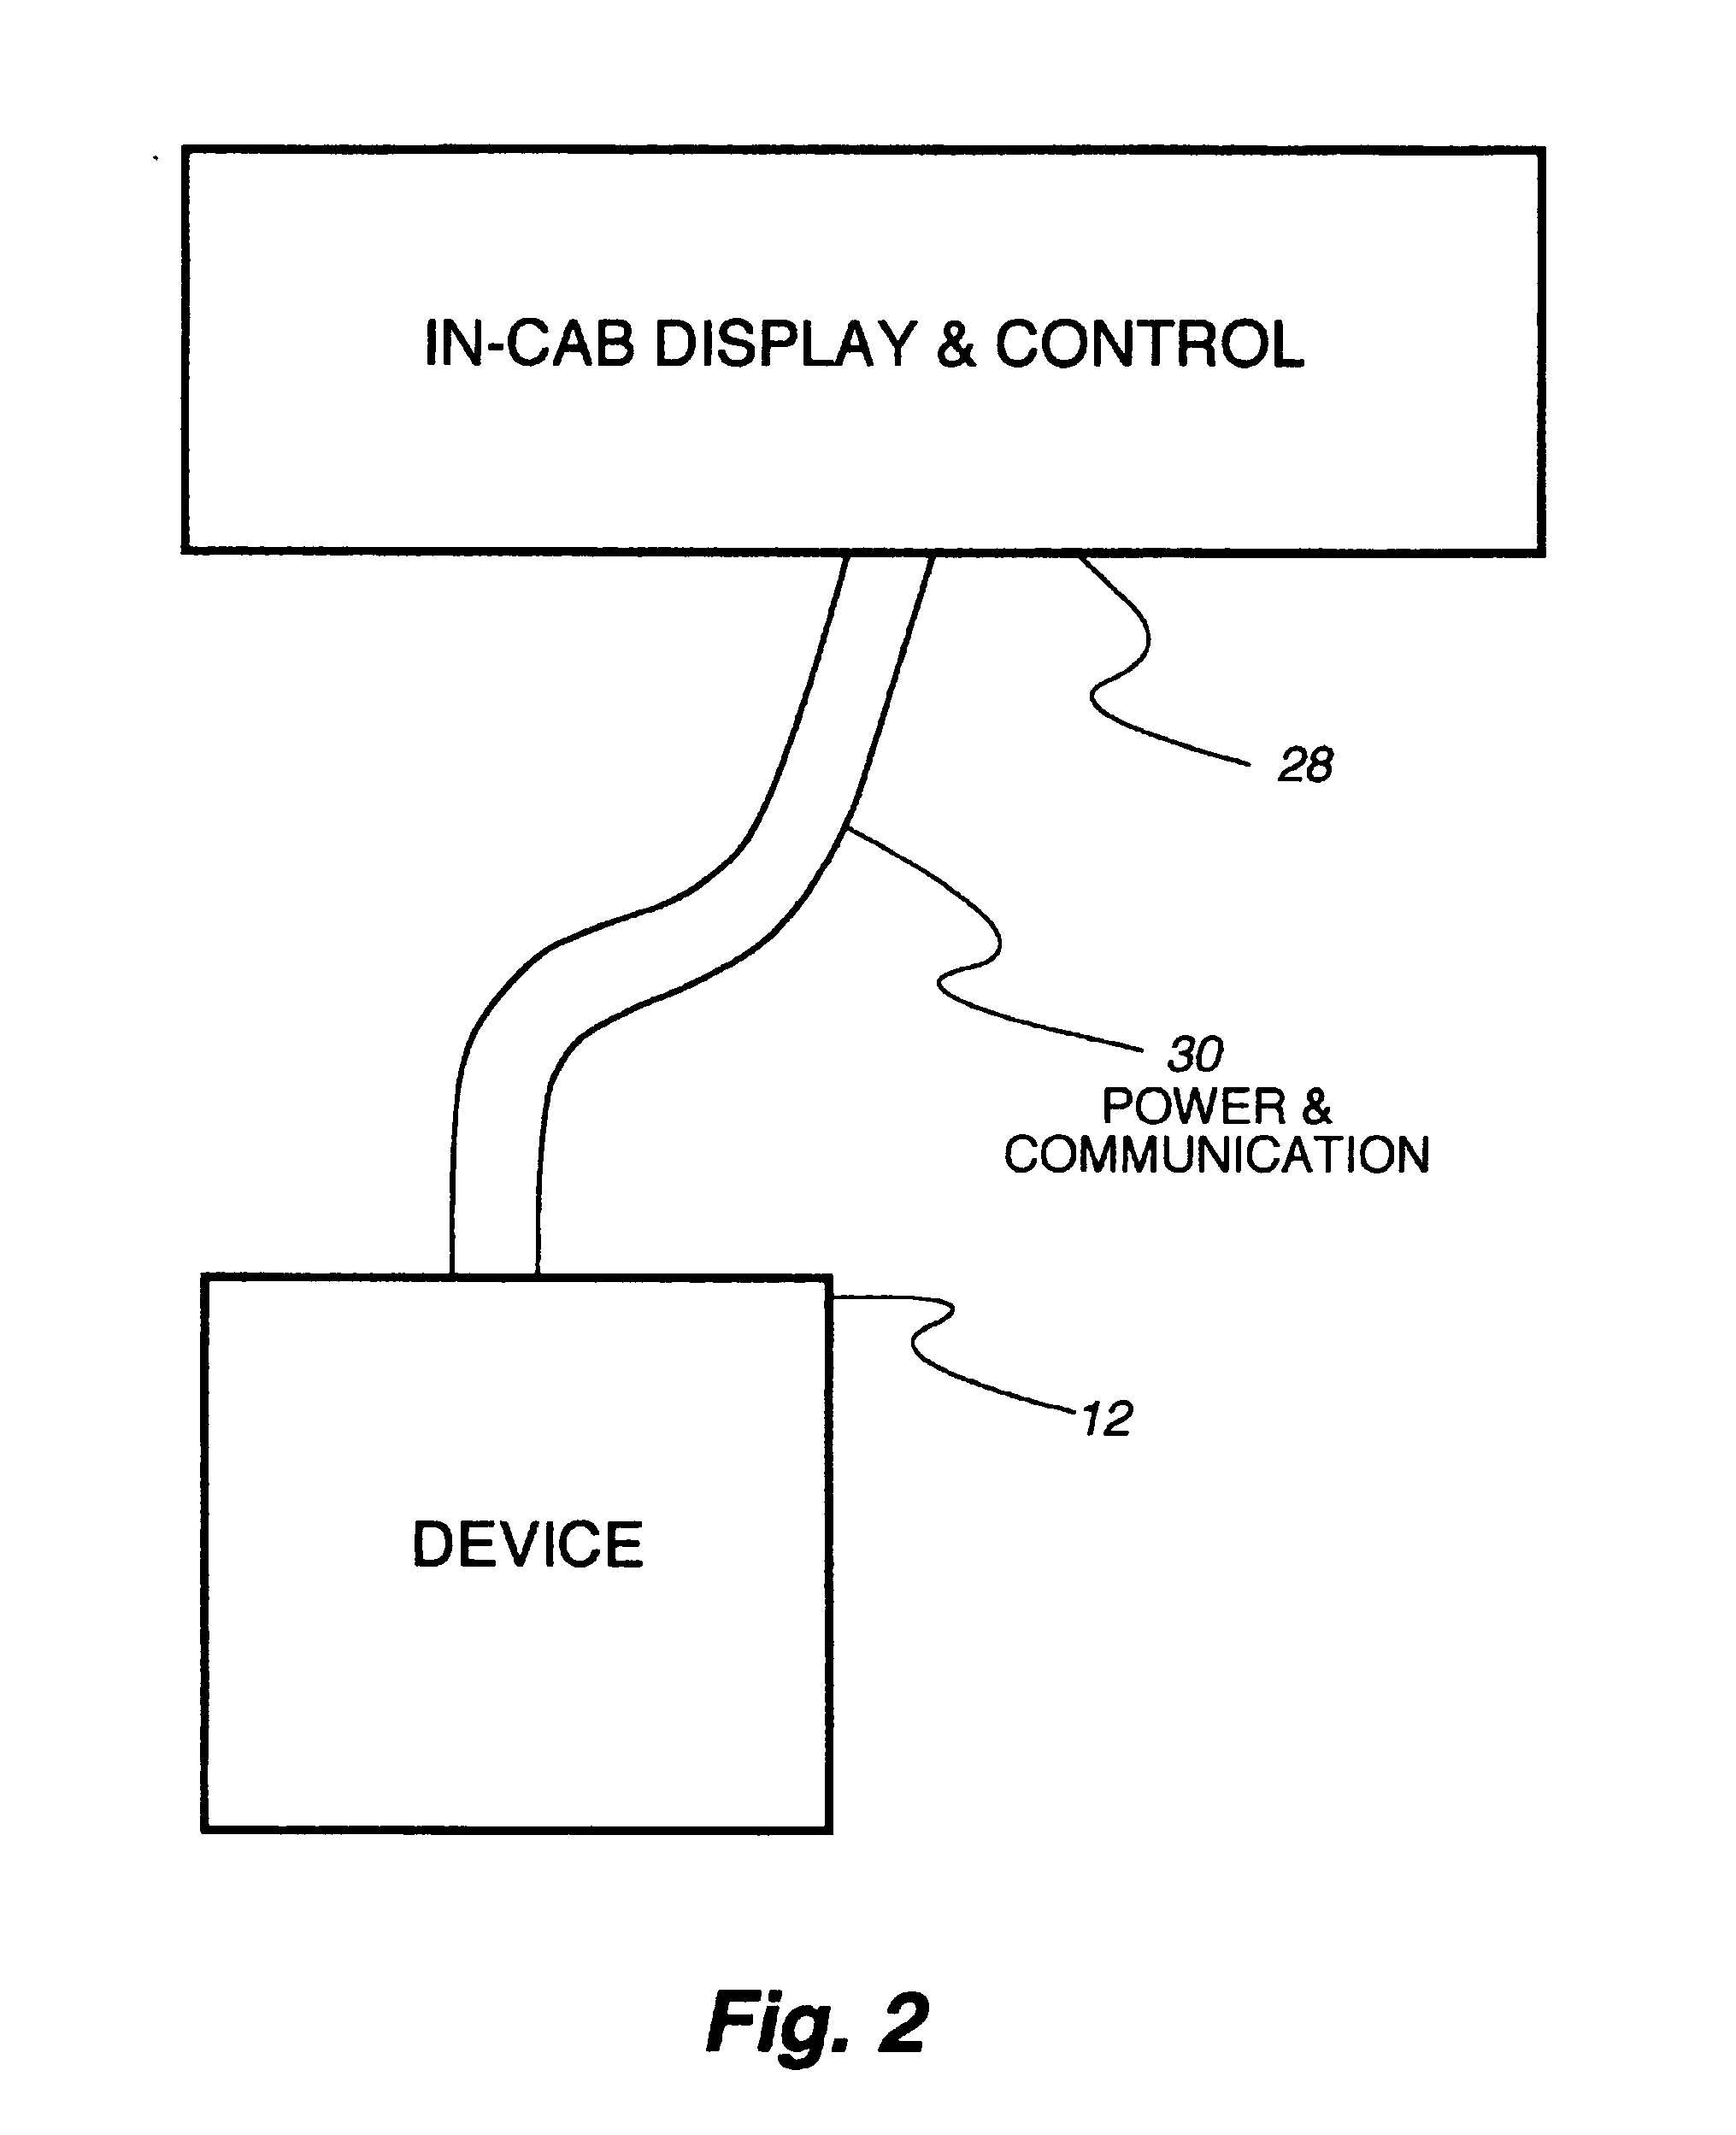 Vehicle mounted travel surface and weather condition monitoring system